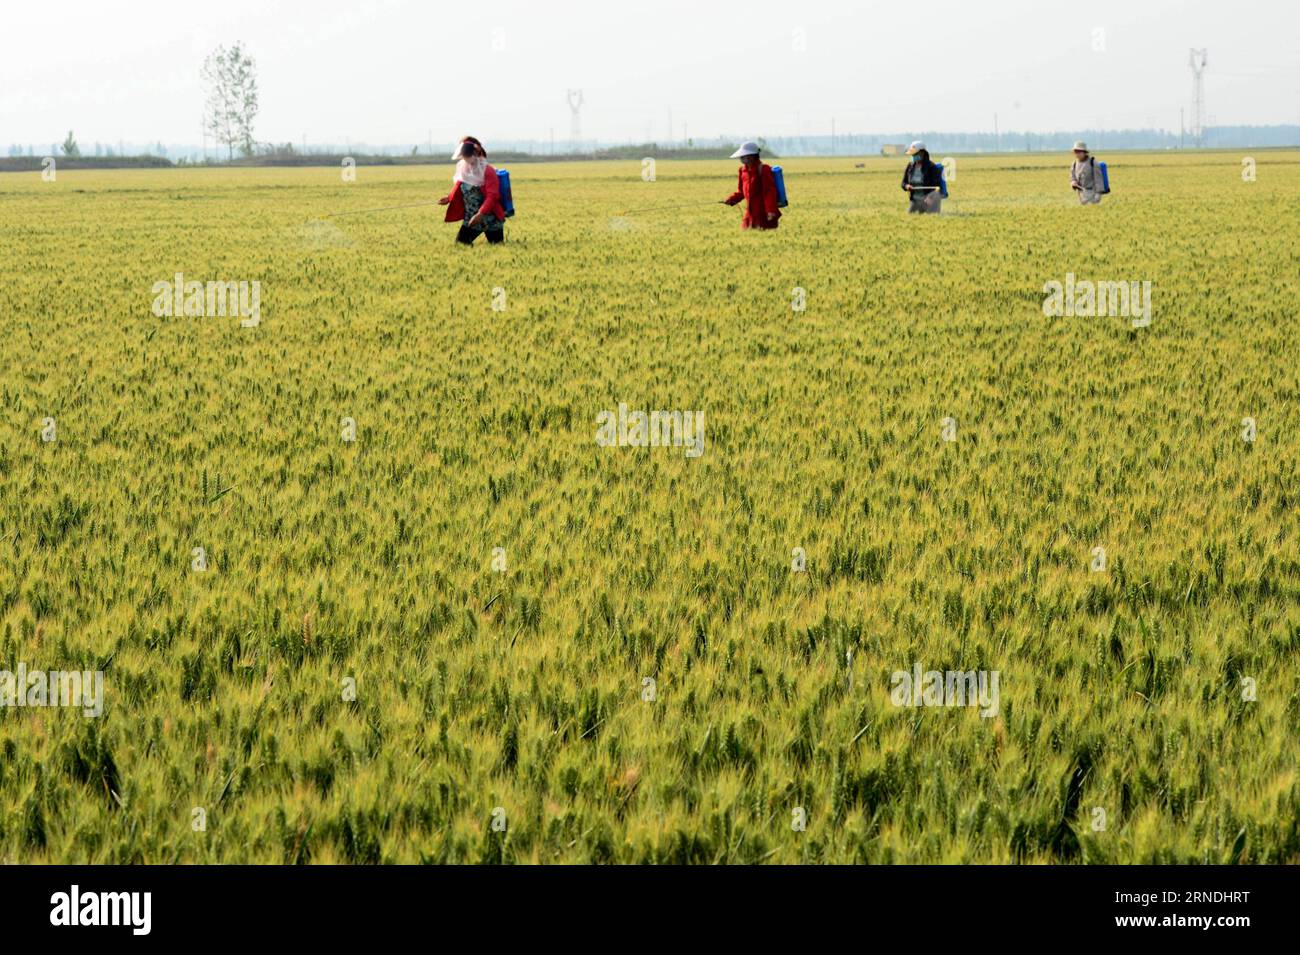 (160521) -- ZHENGZHOU, May 21, 2016 -- Farmers spray pesticide in the wheat field in Xunxian County, central China s Henan Province, May 19, 2016. Farmers here prepare for the wheat harvest in June. Wheat production of Henan Province accounts for a quarter of the national total. Its wheat planting acreage in 2016 totals 80 million mu (5.33 million hectares). ) (lfj) CHINA-HENAN-WHEAT GROWTH (CN) ZhuxXiang PUBLICATIONxNOTxINxCHN   160521 Zhengzhou May 21 2016 Farmers Spray Pesticide in The Wheat Field in XUNXIAN County Central China S Henan Province May 19 2016 Farmers Here prepare for The Whea Stock Photo